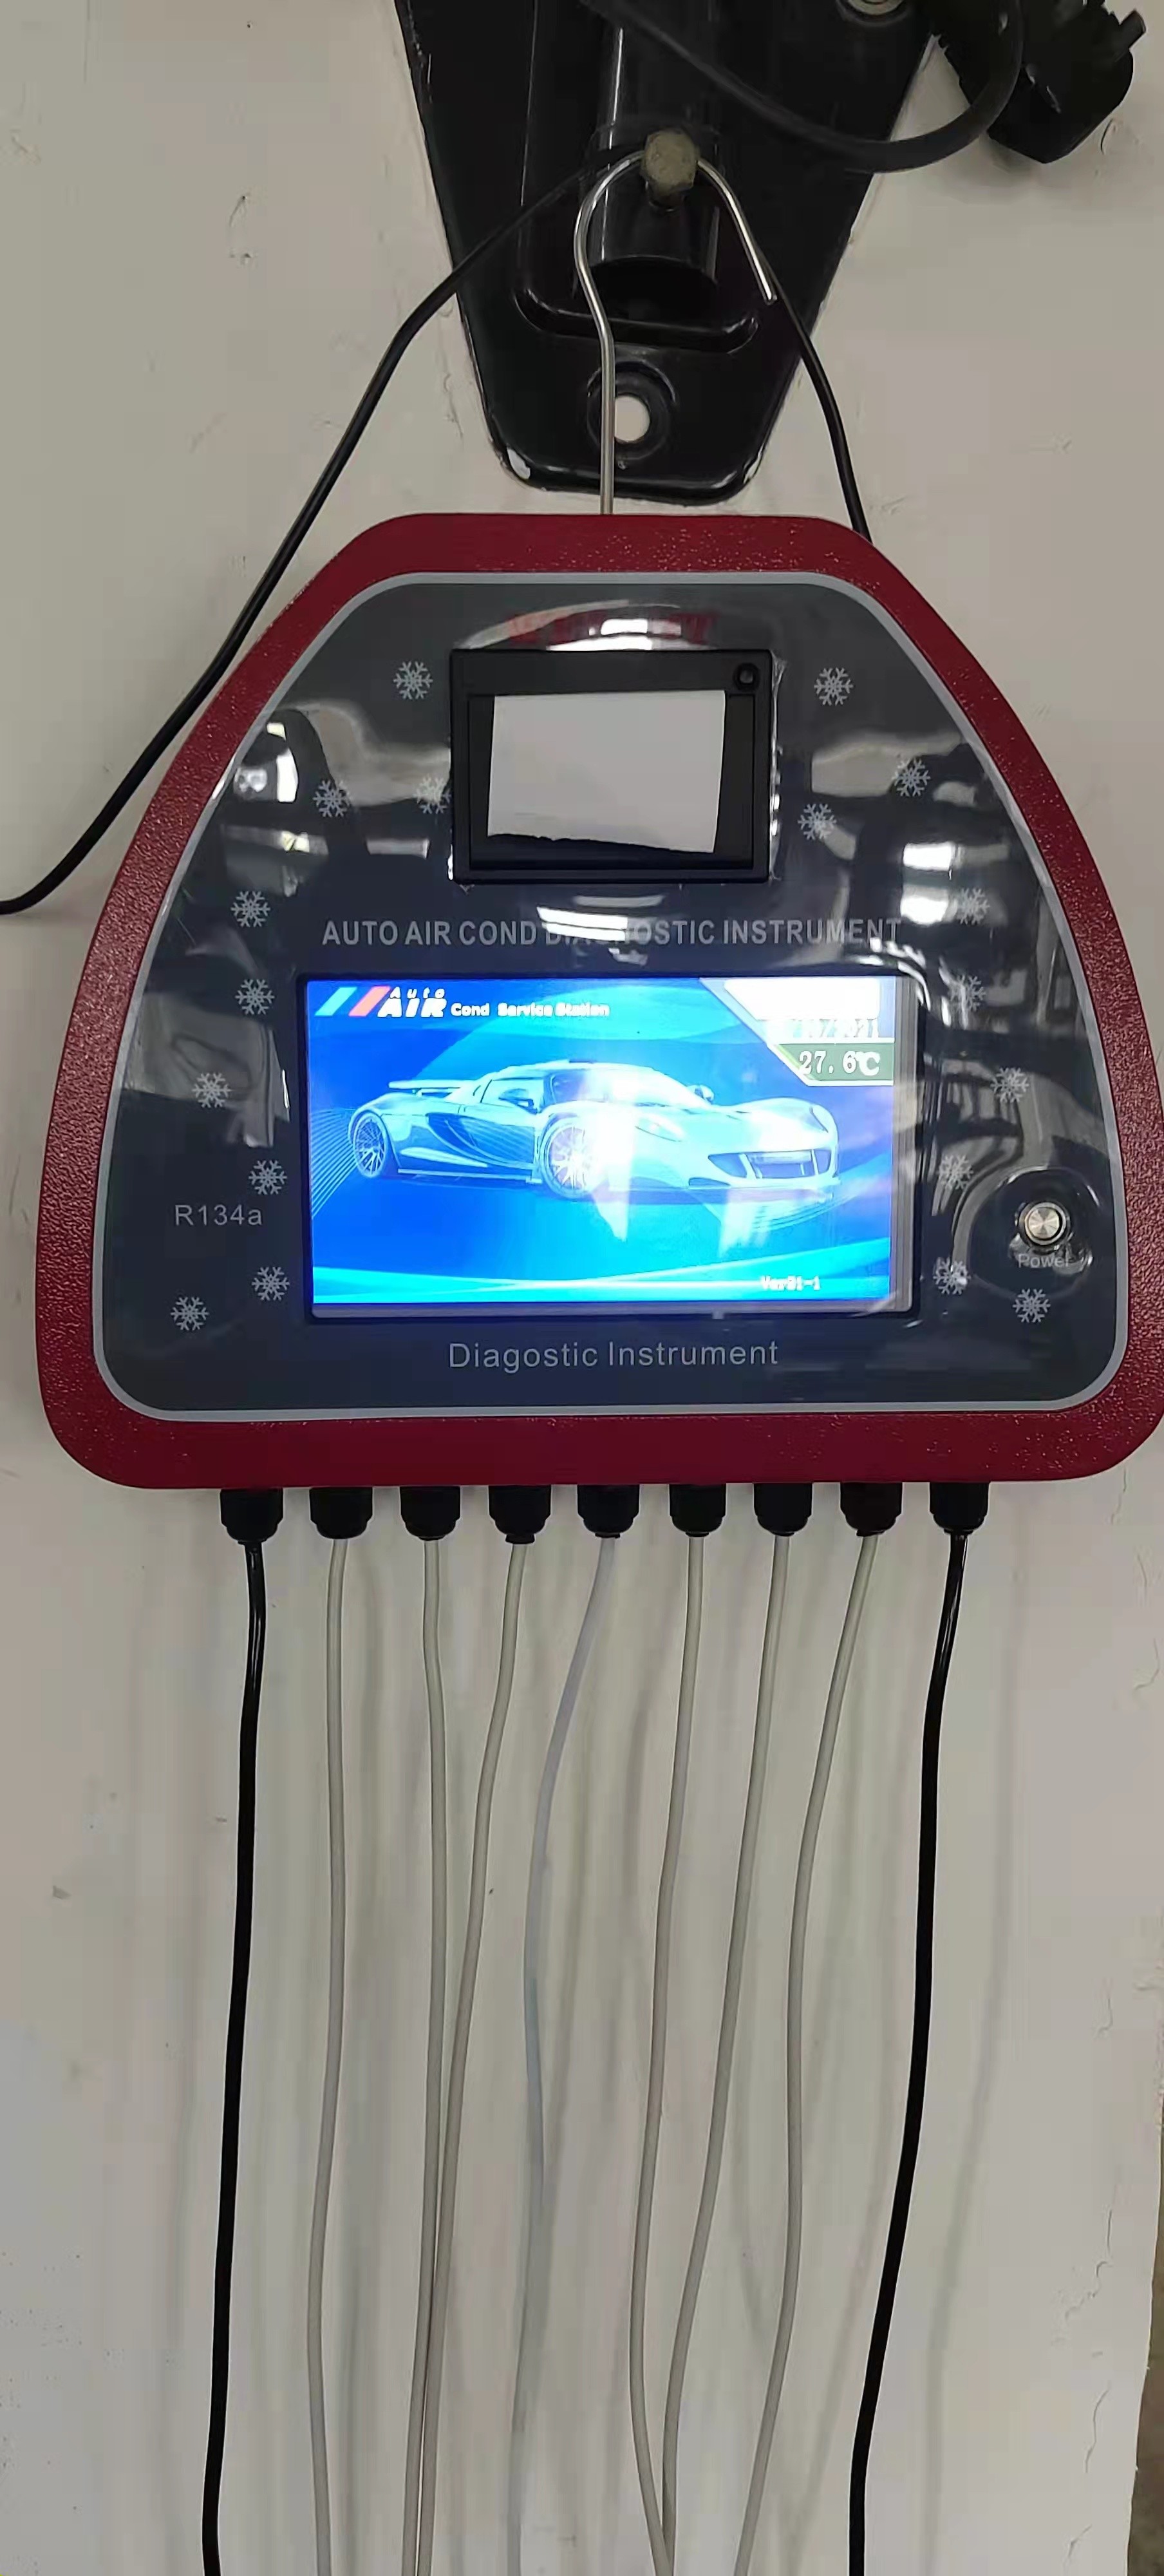  Portable Car Air Conditioning Diagnostic Instrument With Printing Function Manufactures